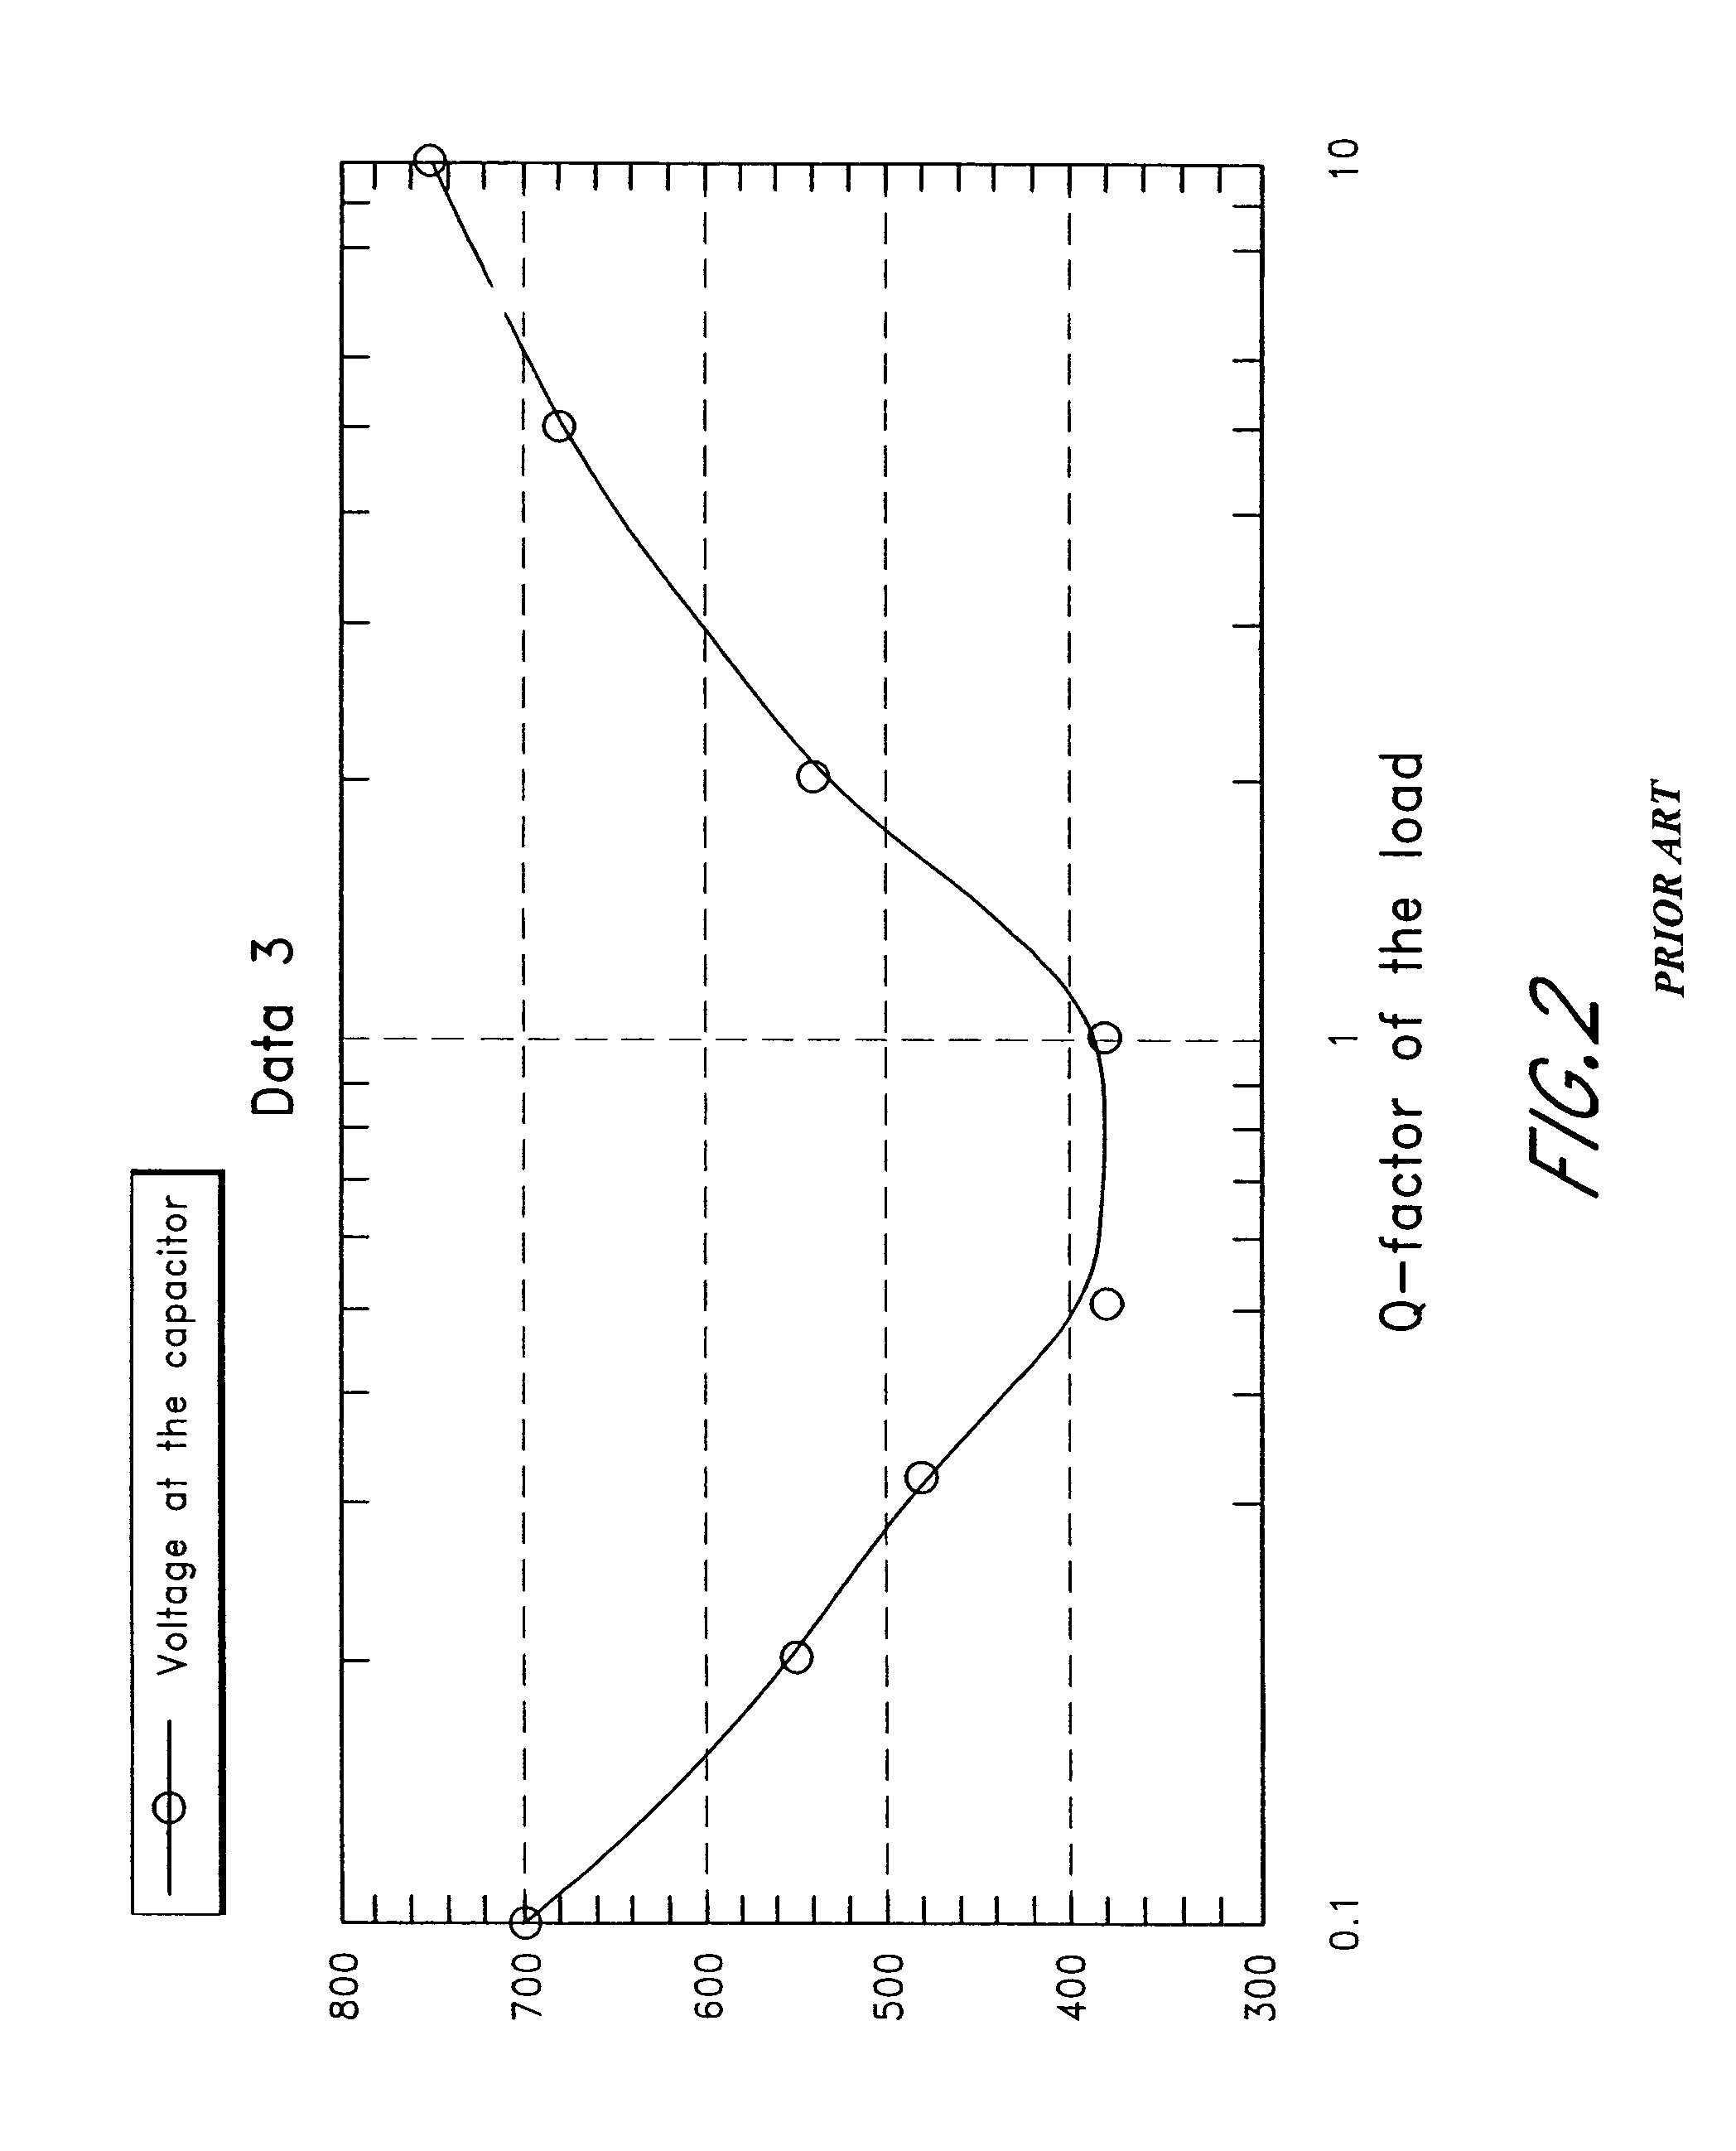 Solid-state microsecond capacitance charger for high voltage and pulsed power